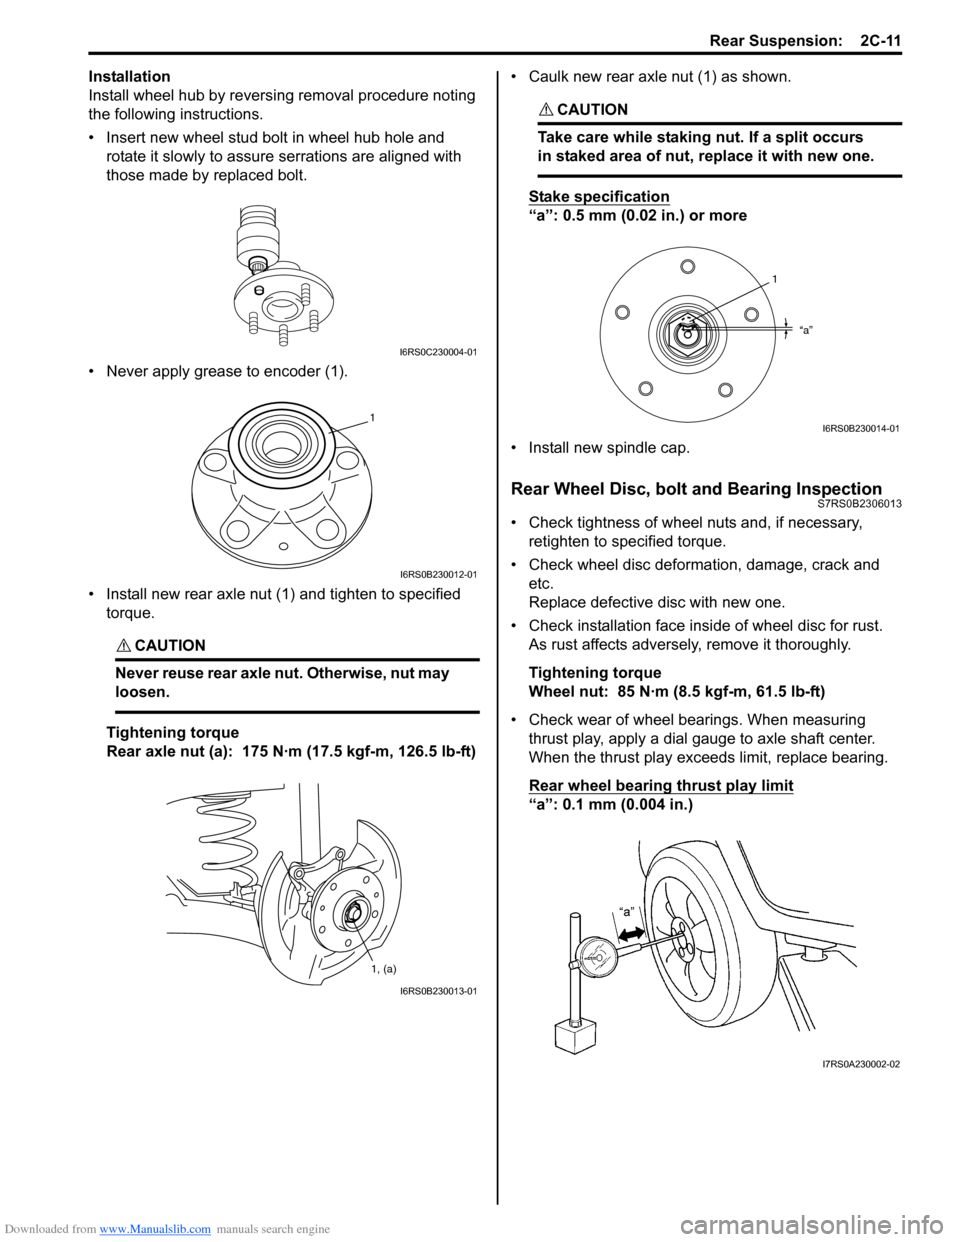 SUZUKI SWIFT 2006 2.G Service Owners Manual Downloaded from www.Manualslib.com manuals search engine Rear Suspension:  2C-11
Installation
Install wheel hub by reversing removal procedure noting 
the following instructions.
• Insert new wheel 